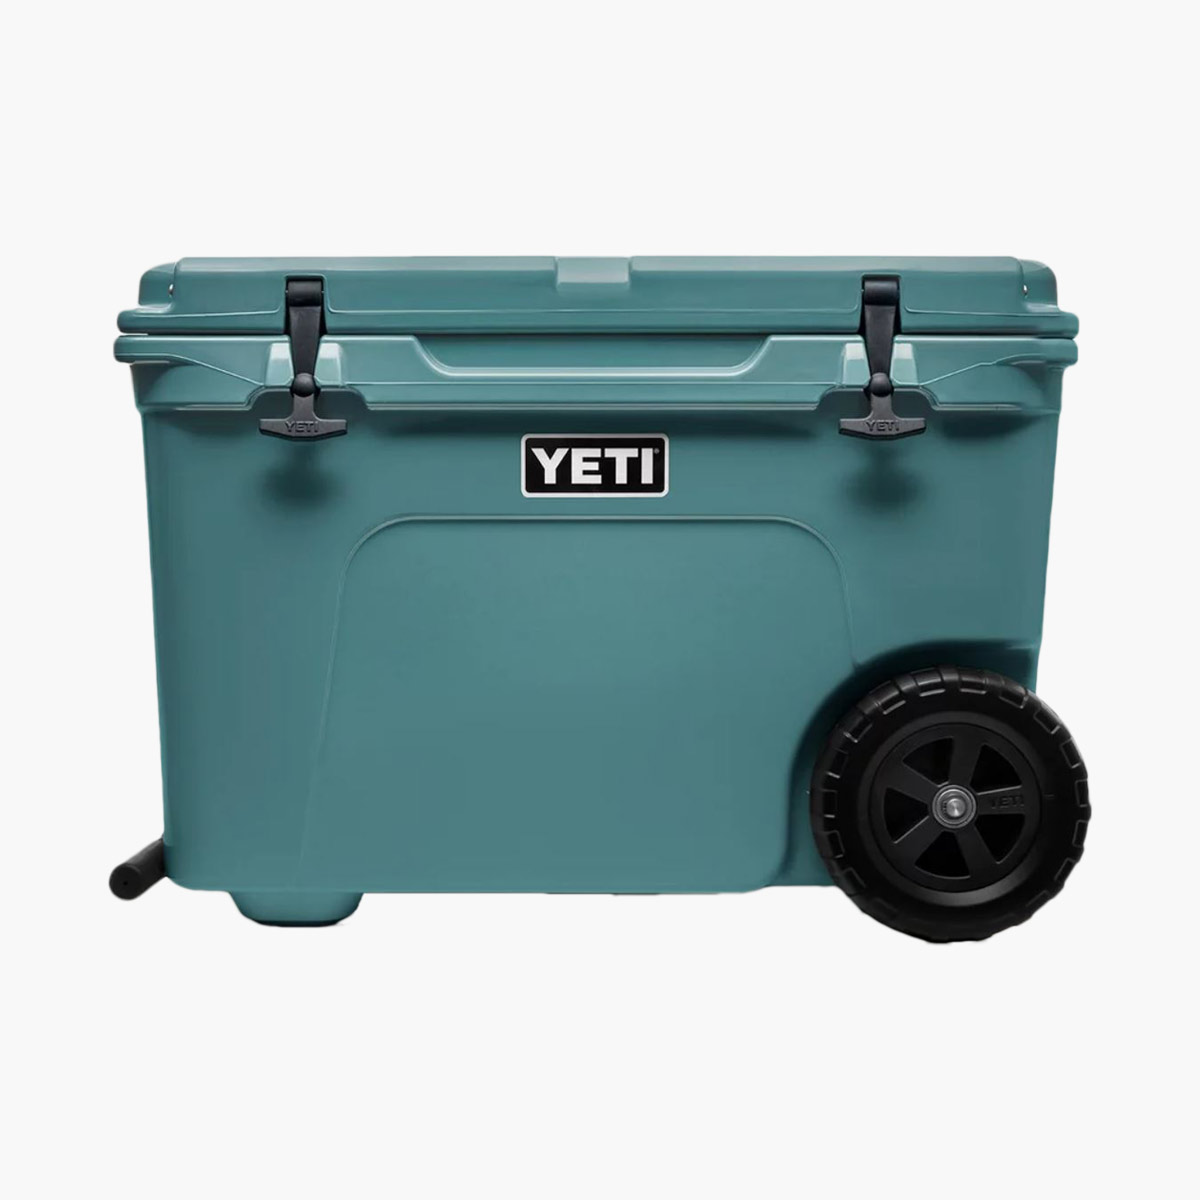 A blue Yeti cooler with wheels.